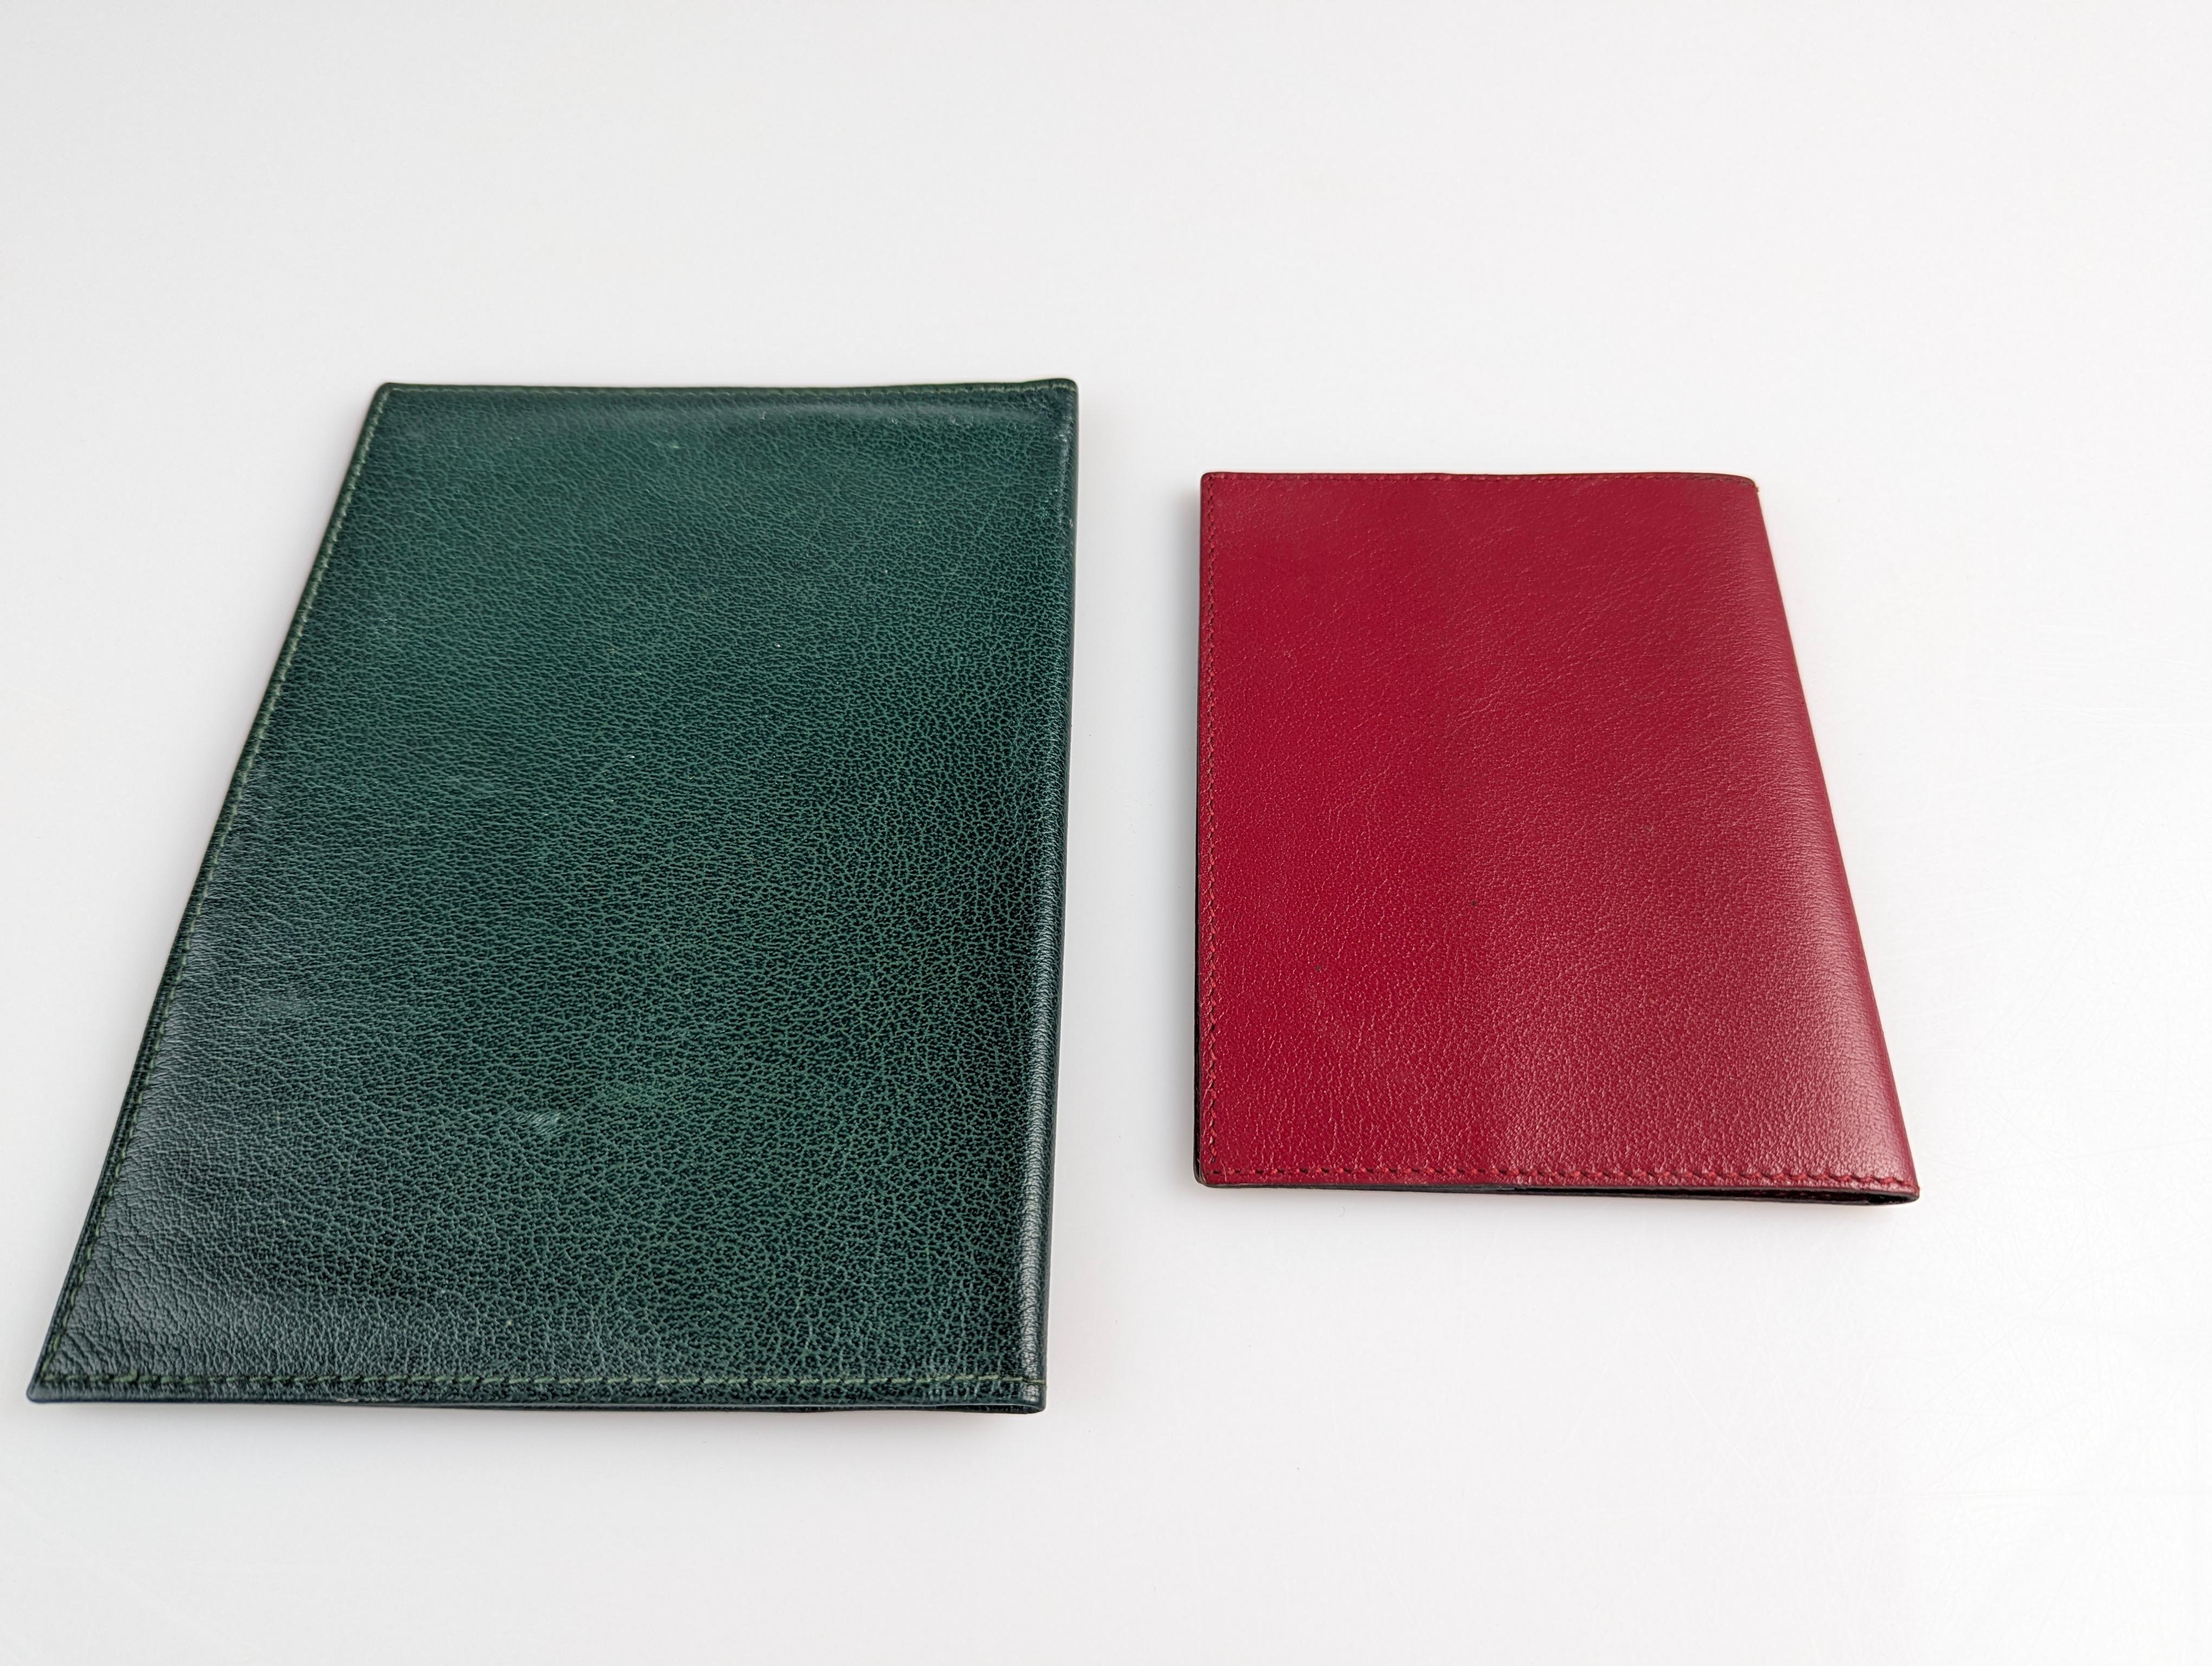 Late 20th Century Vintage Rolex Green and Red Leather Wallet and Passport